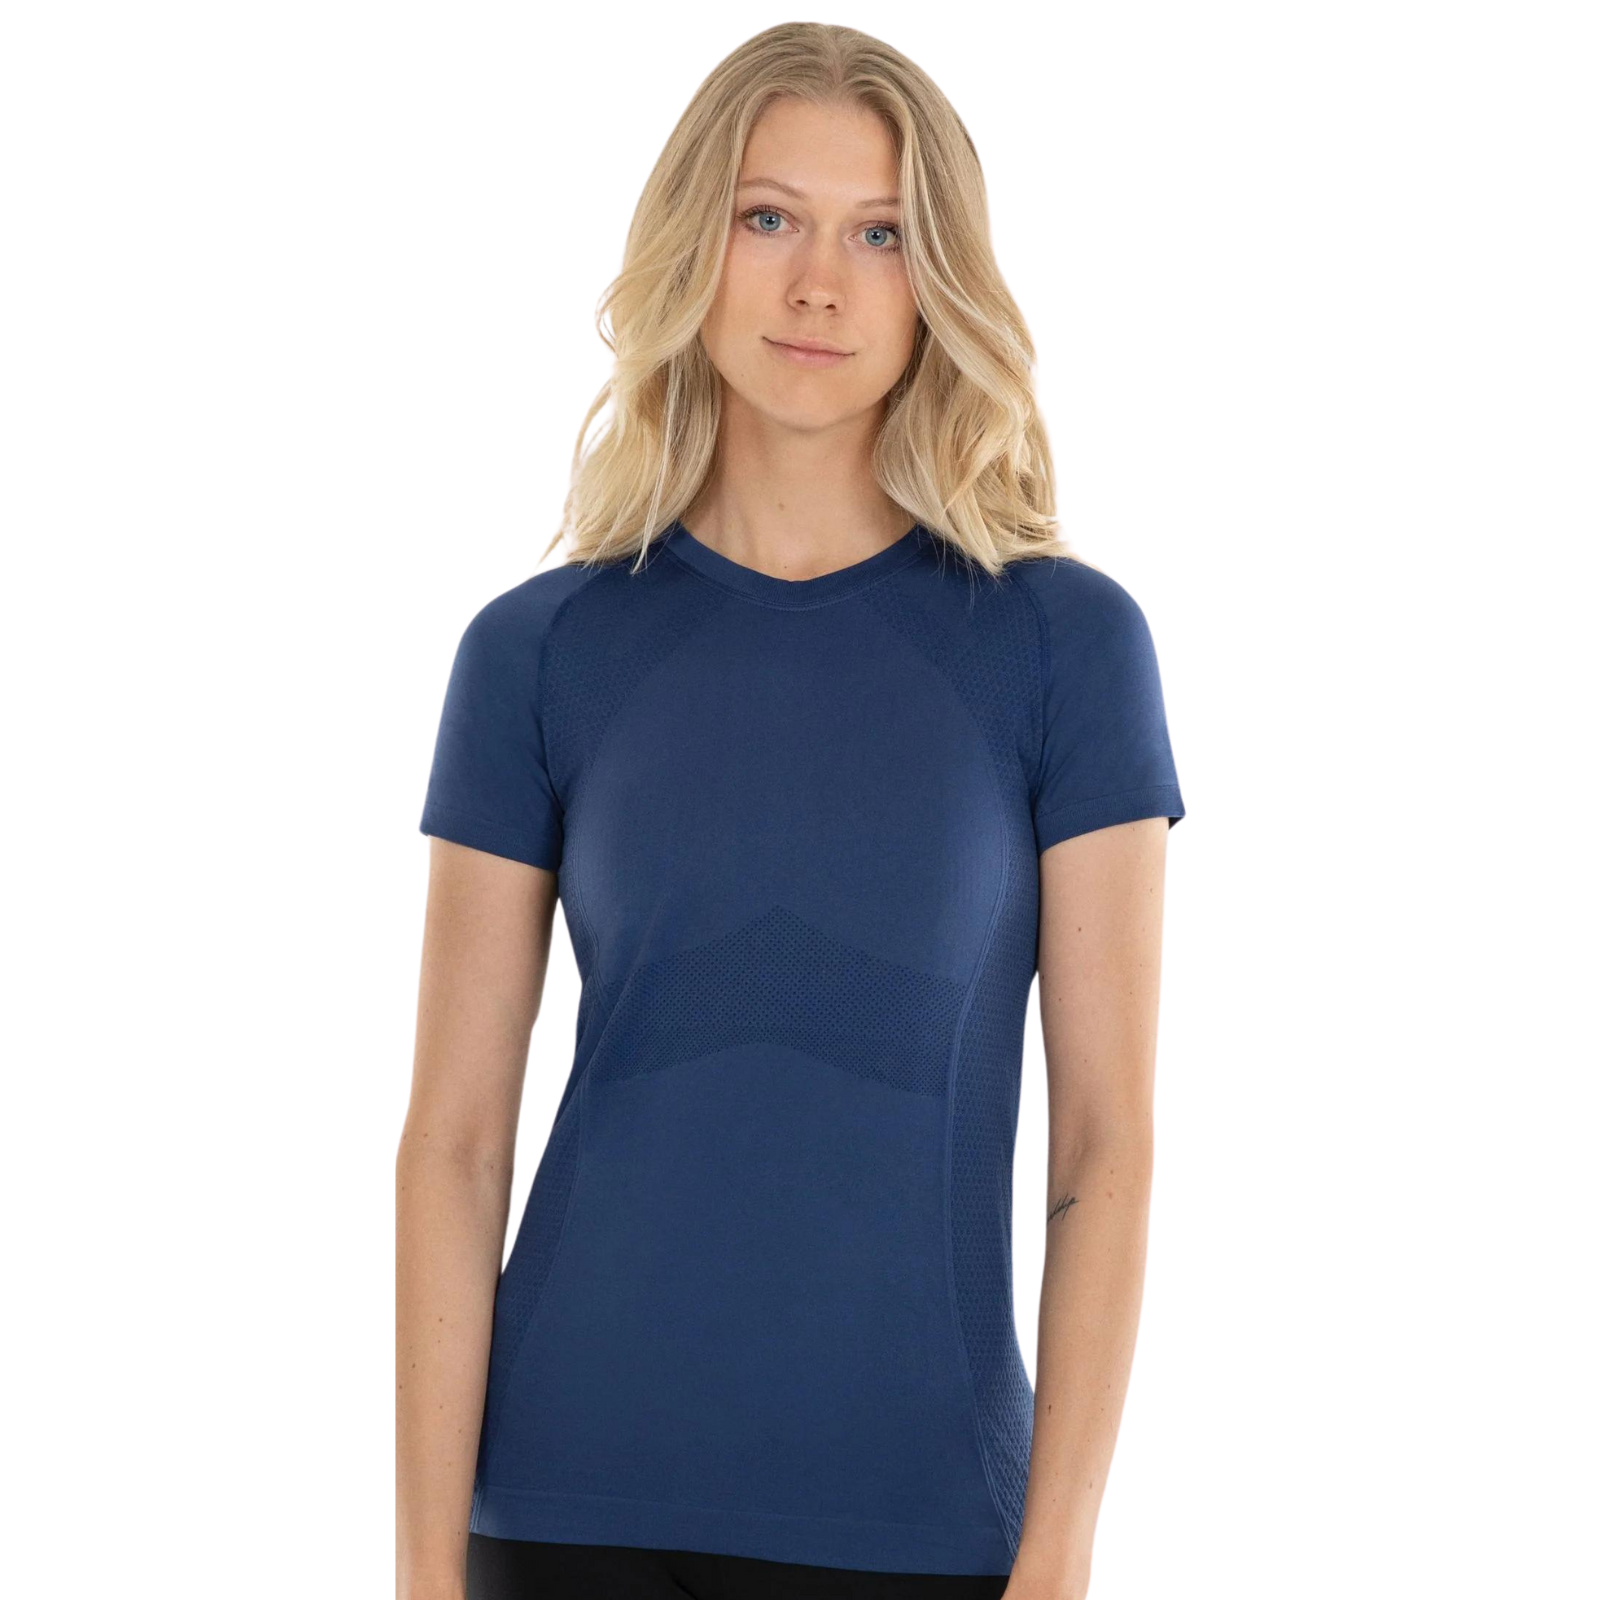 Anique Short Sleeve Crew Shirt in Blueberry - Women&#39;s XS (0-2)